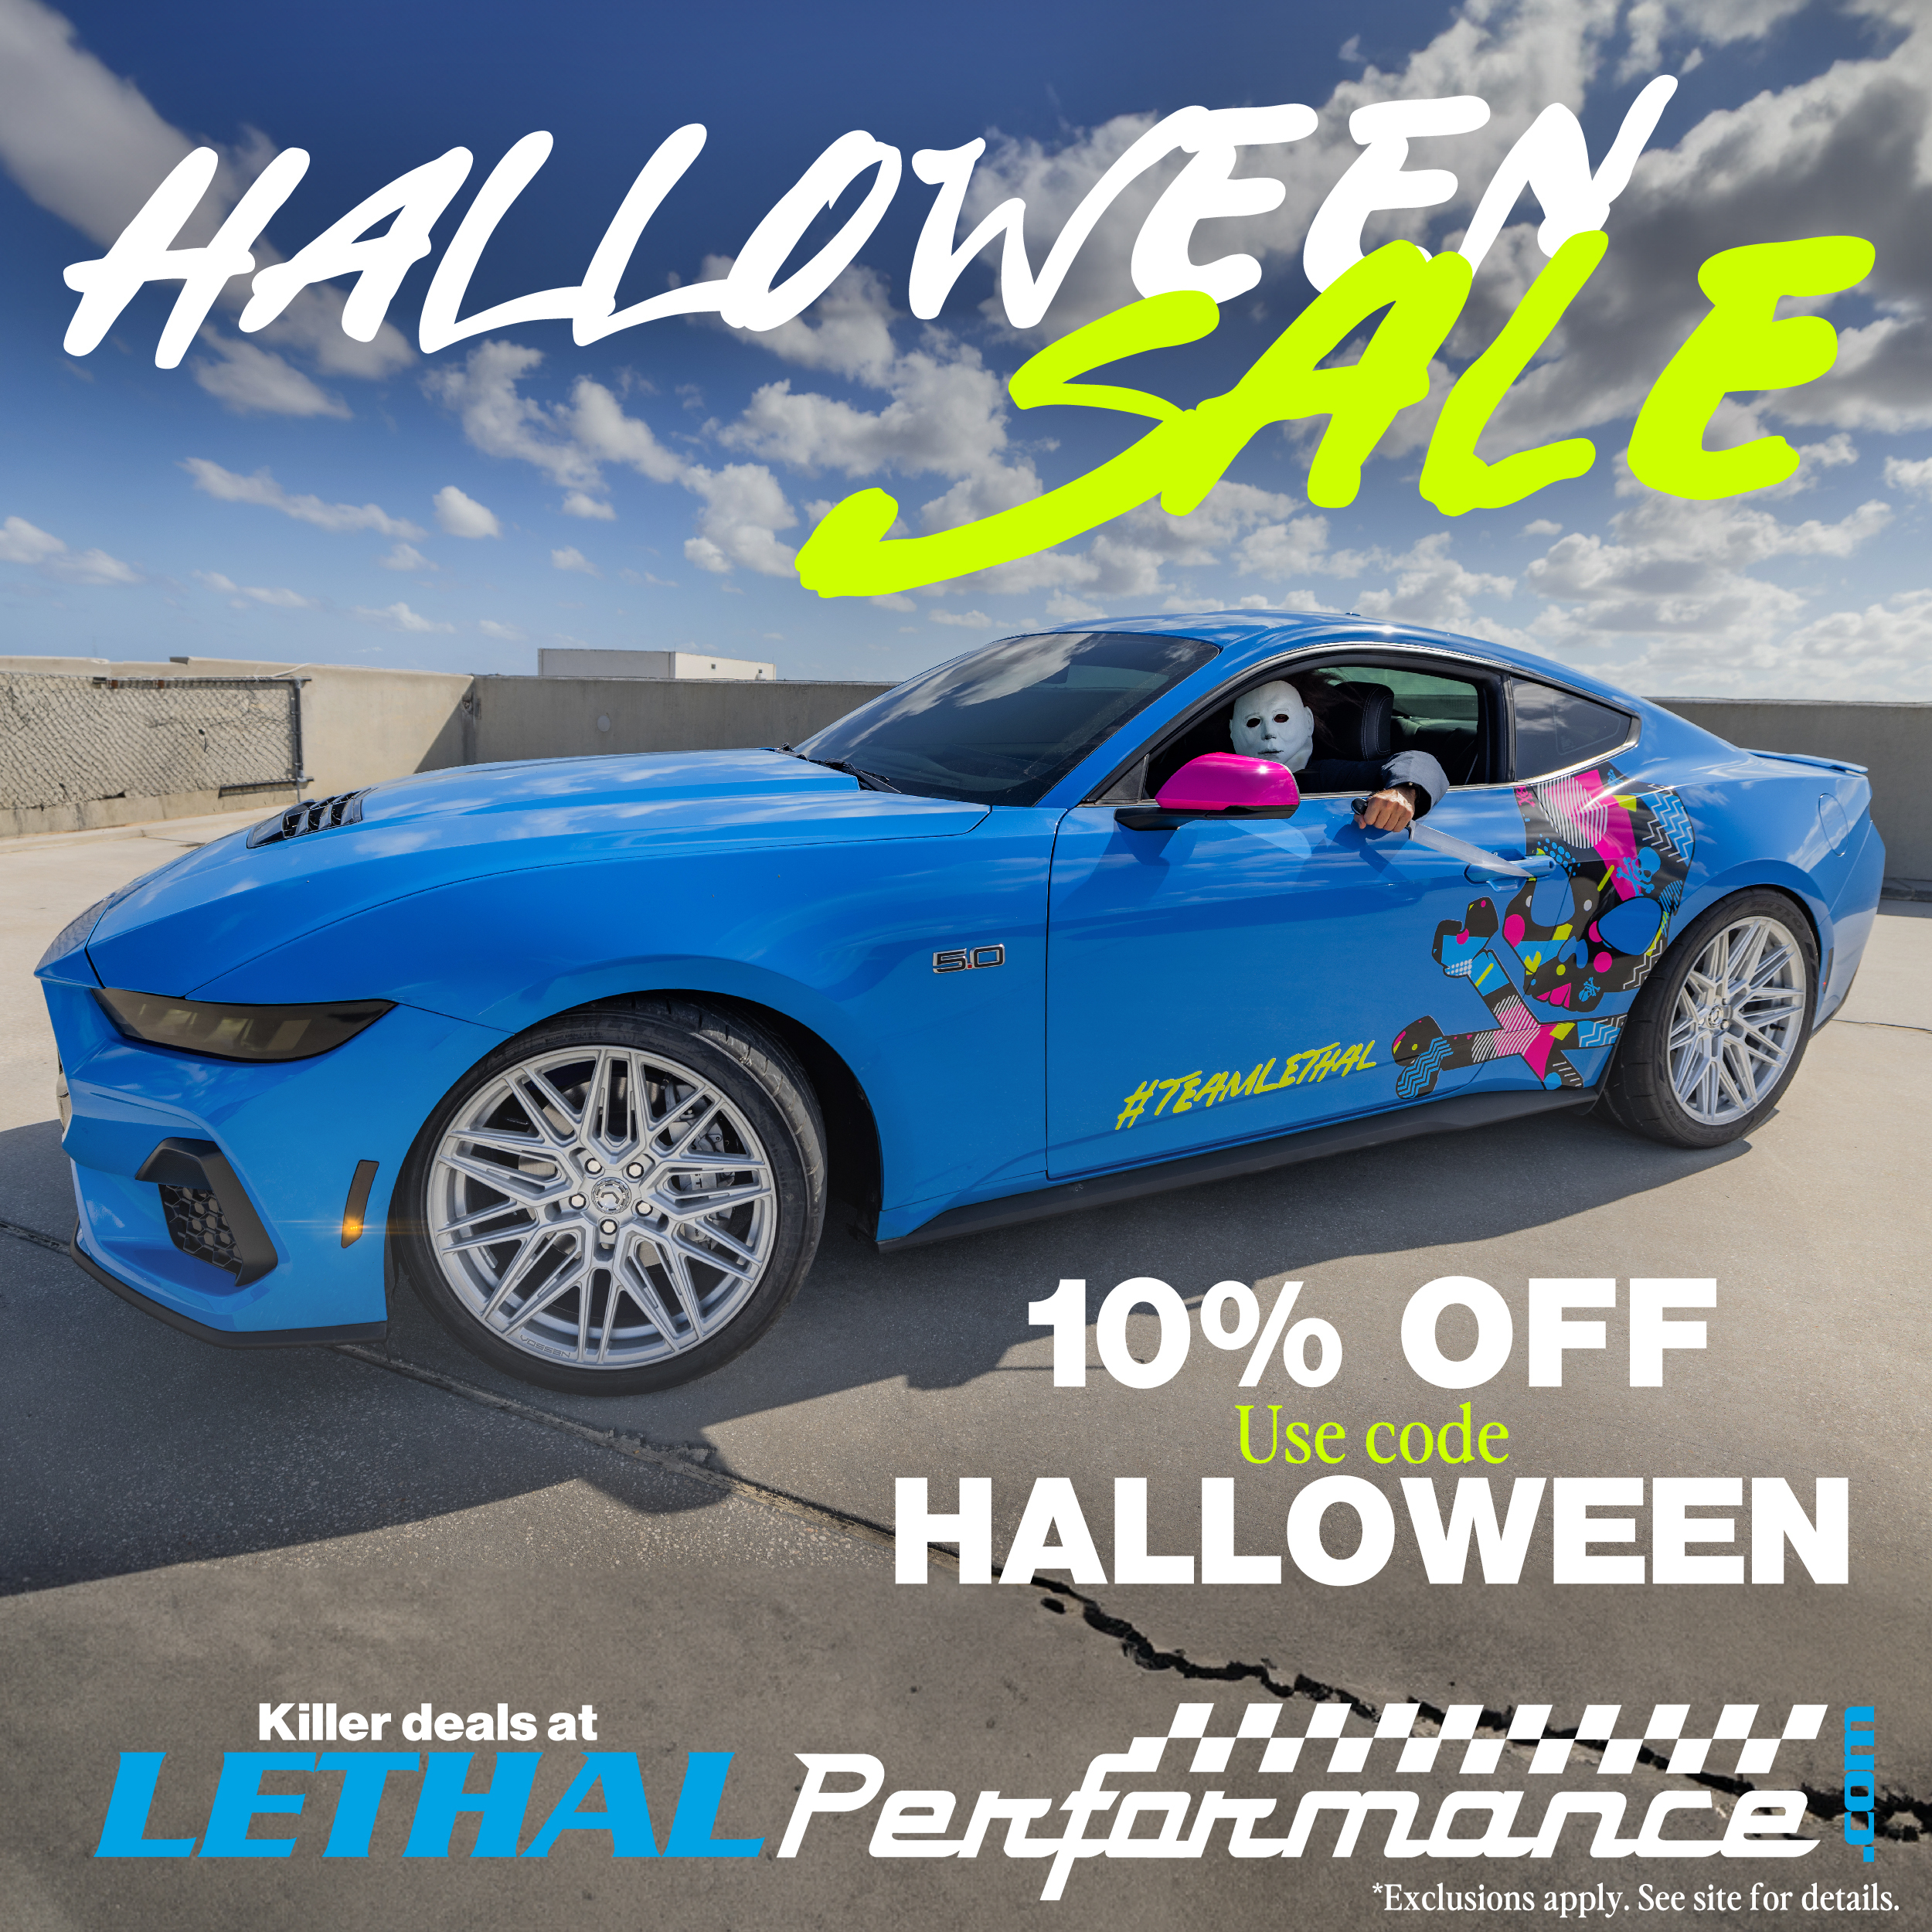 S650 Mustang Lethal Performance SITEWIDE Halloween Sale! halloweensale5 (1)